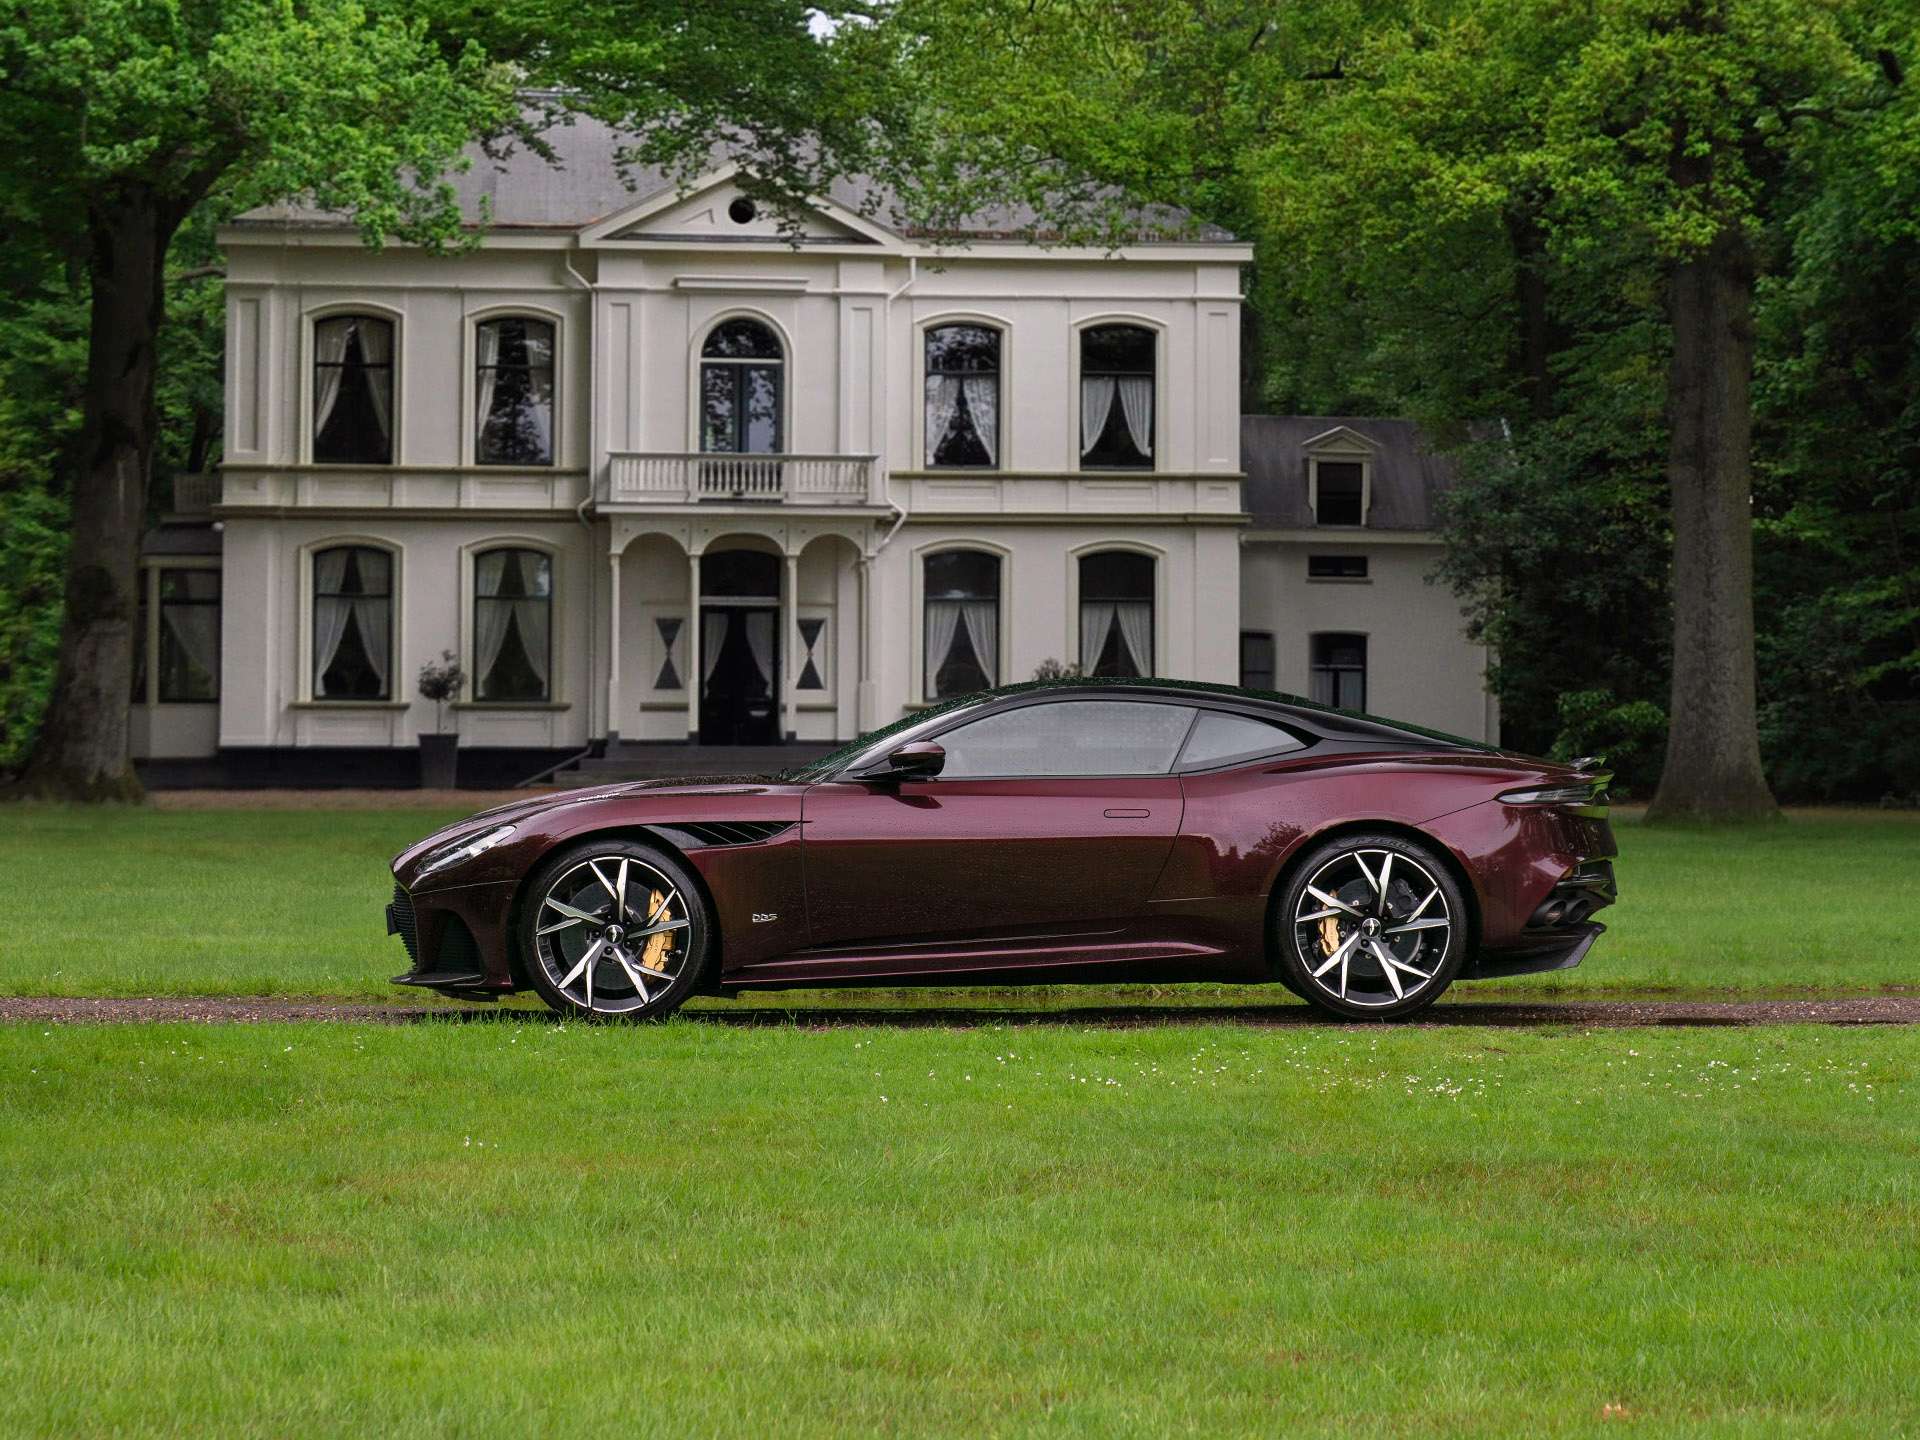 Aston Martin DBS Coupe in Red used in NUNSPEET for € 309,500.-